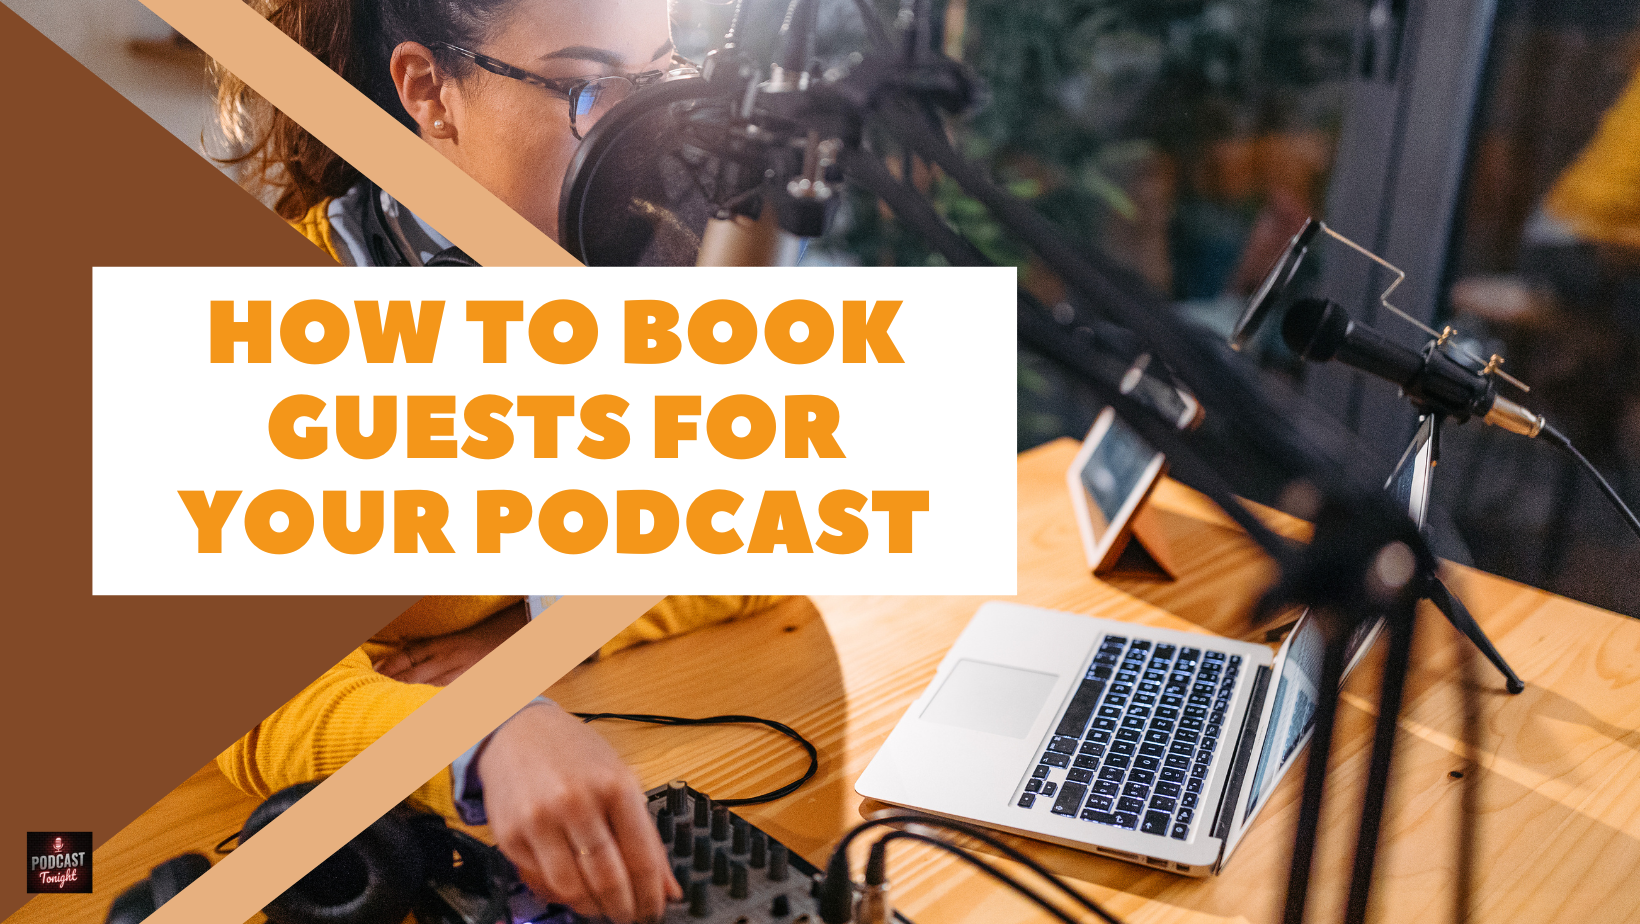 How to Book Guests for Your Podcast